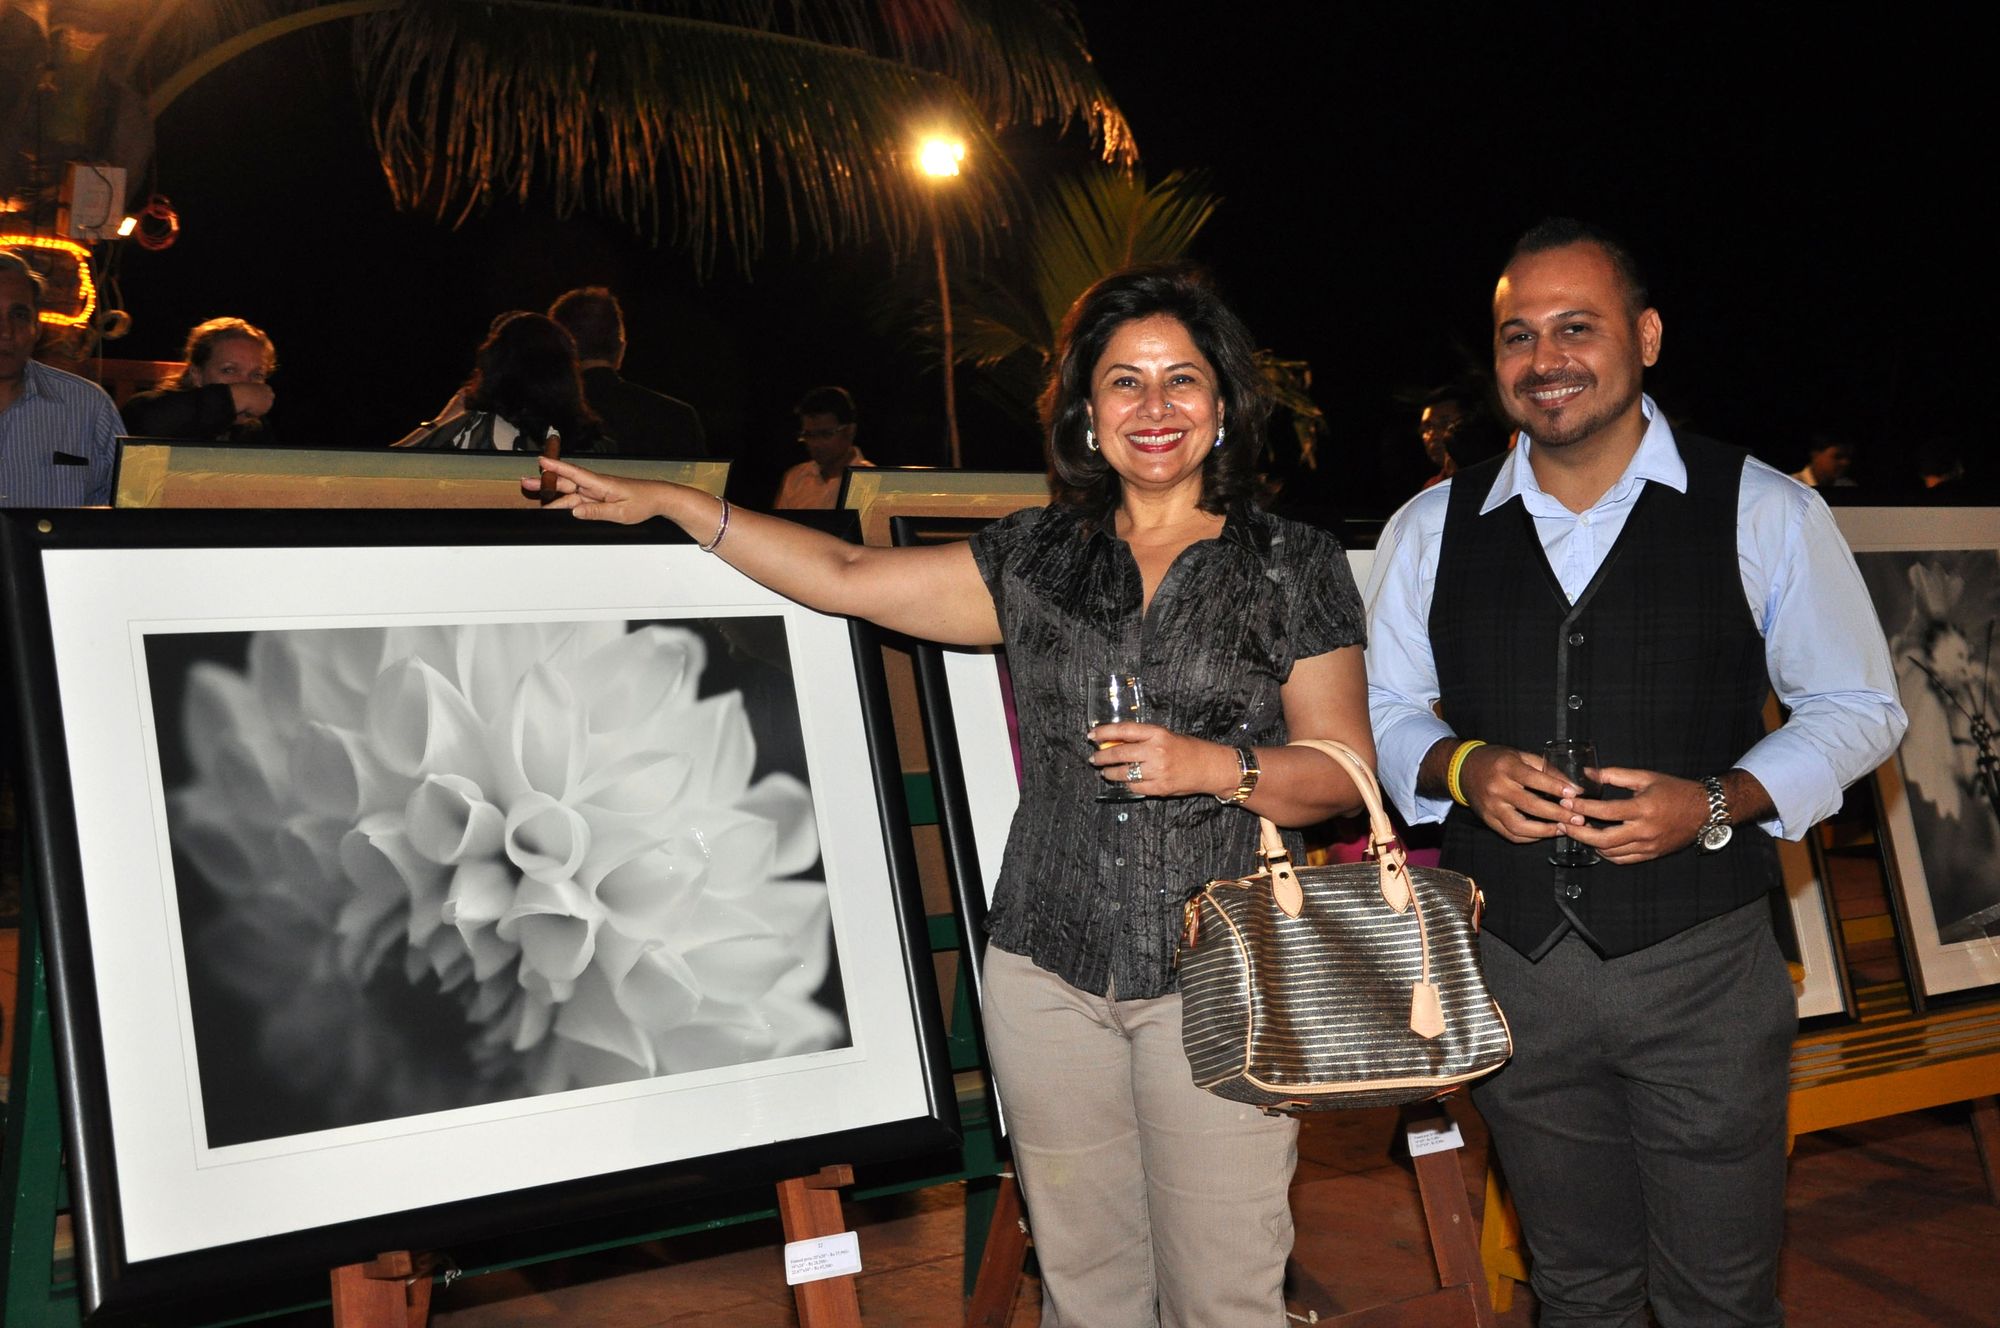 Narayani Advani with her picture of the Black and White Dalia she paid Rs 38,000/- all the money was donated to esteemed NGO "MUKTANGAN" and the photographer Parhad Goghavala